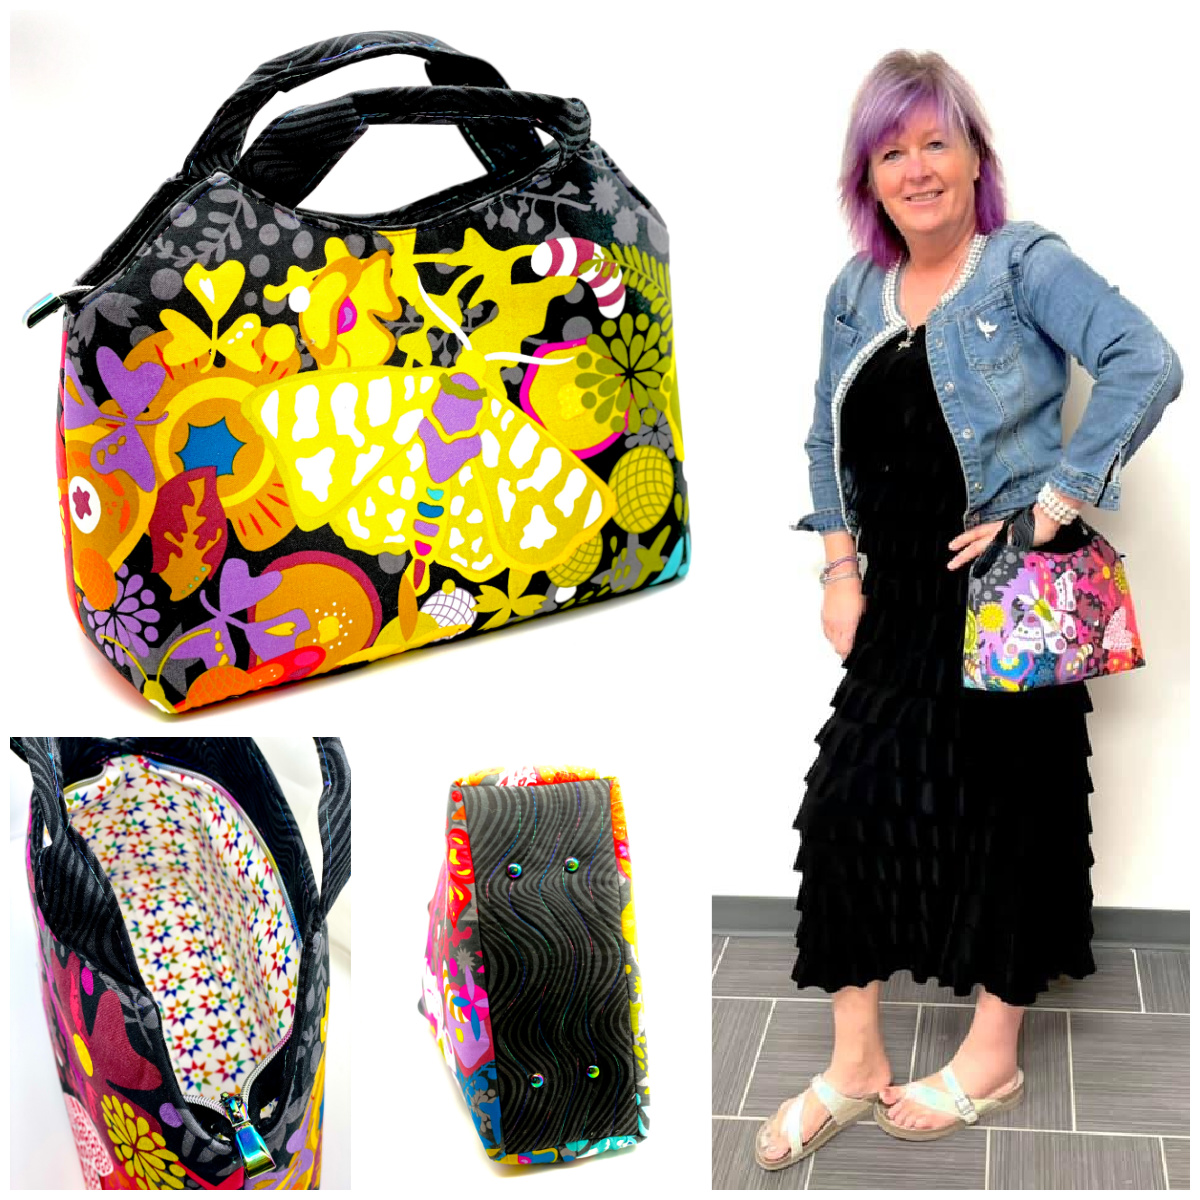 The Hope Handbag from Sewing Patterns by Junyuan 
, made by Tracy Loyek of Purple Katz Quilting